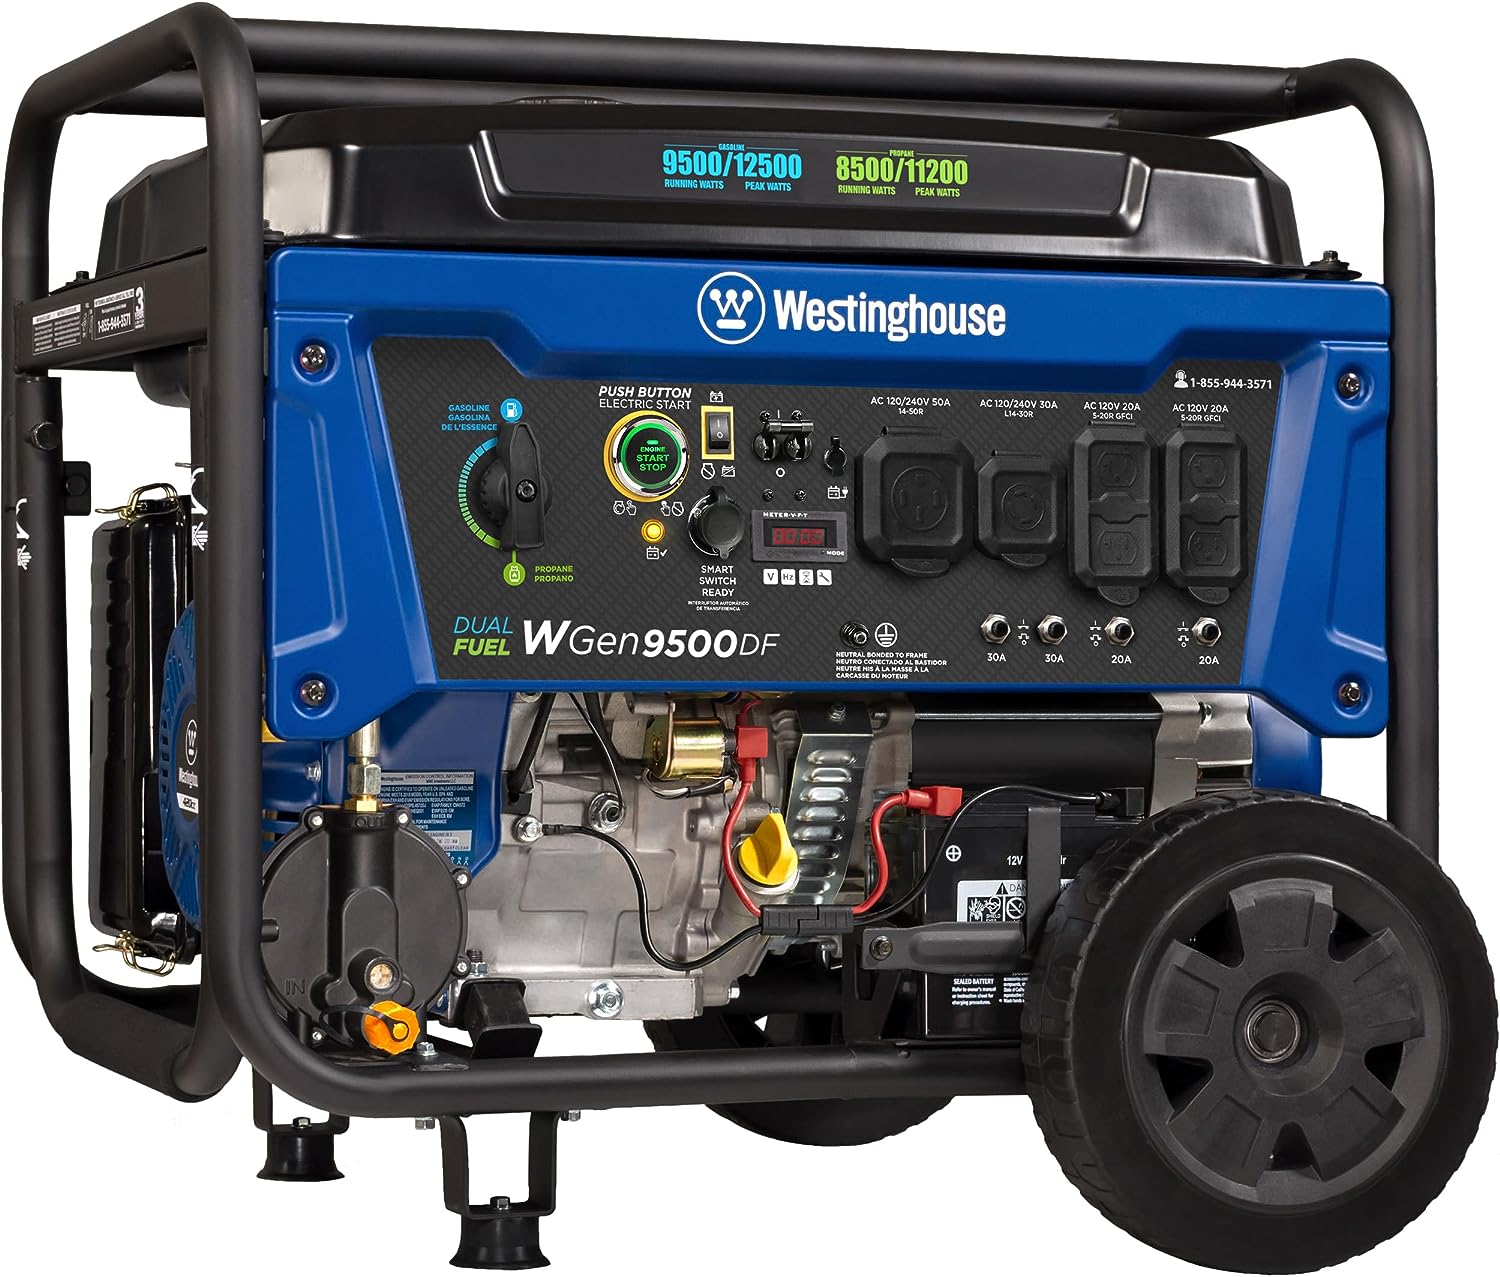 Westinghouse Outdoor Power Equipment 12500 Peak Watt Dual Fuel Home Backup Portable Generator, Remote Electric Start, Transfer Switch Ready, Gas and Propane Powered, CARB Compliant
